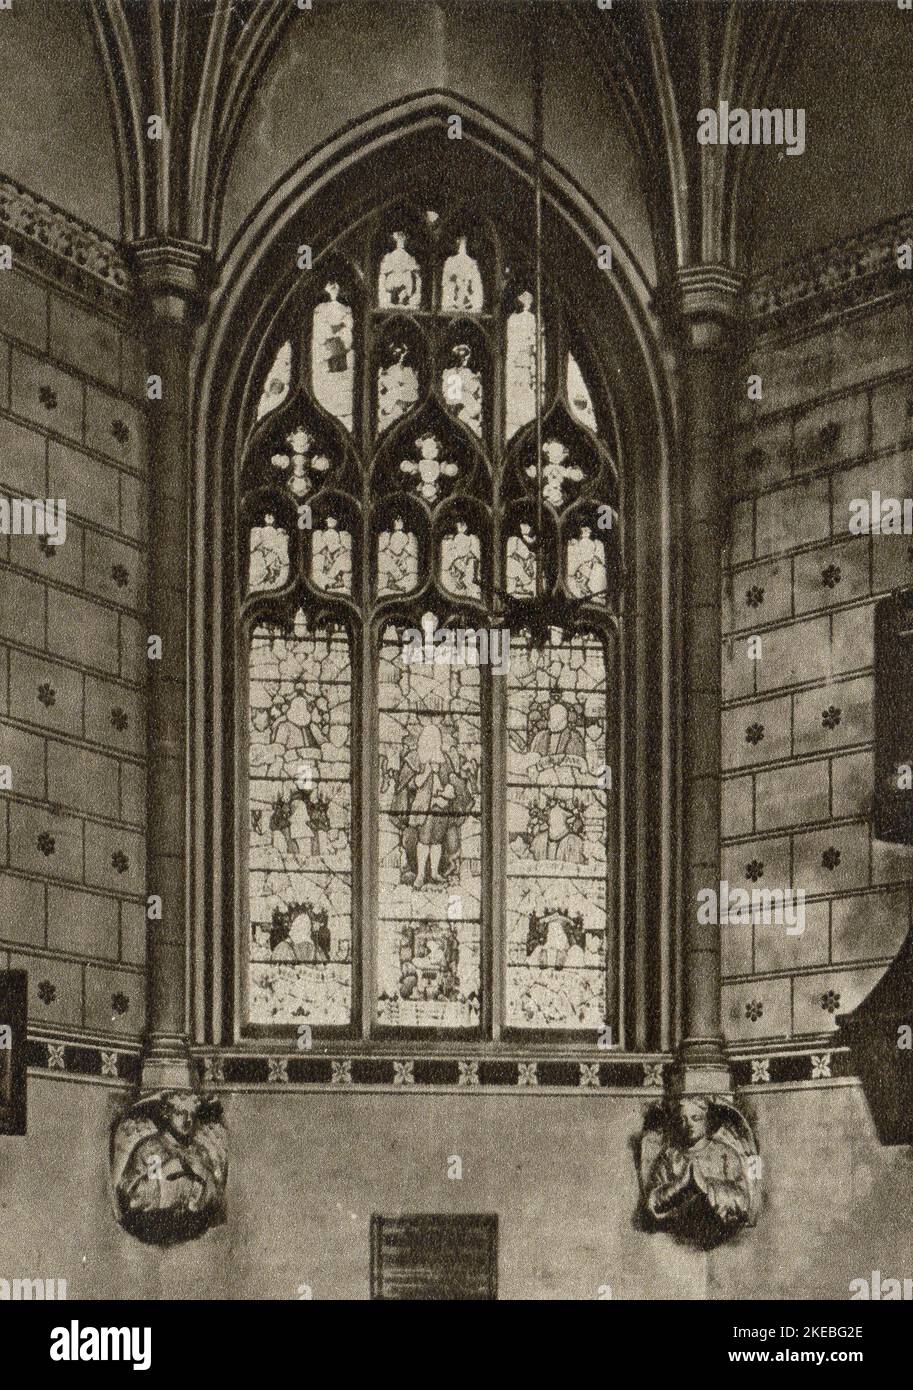 Photo lithograph of a stained glass window by Percy Bacon & Brothers installed in 1895 in St Dunstan's in the West, Fleet Street, London. The window celebrates the life and work of Isaak Walton, famous for his book 'The Complete Angler'. The. standing figure of Walton is a copy of the statue by Miss Mary Grant which stands in a niche of the great screen in Winchester Cathedral. Stock Photo